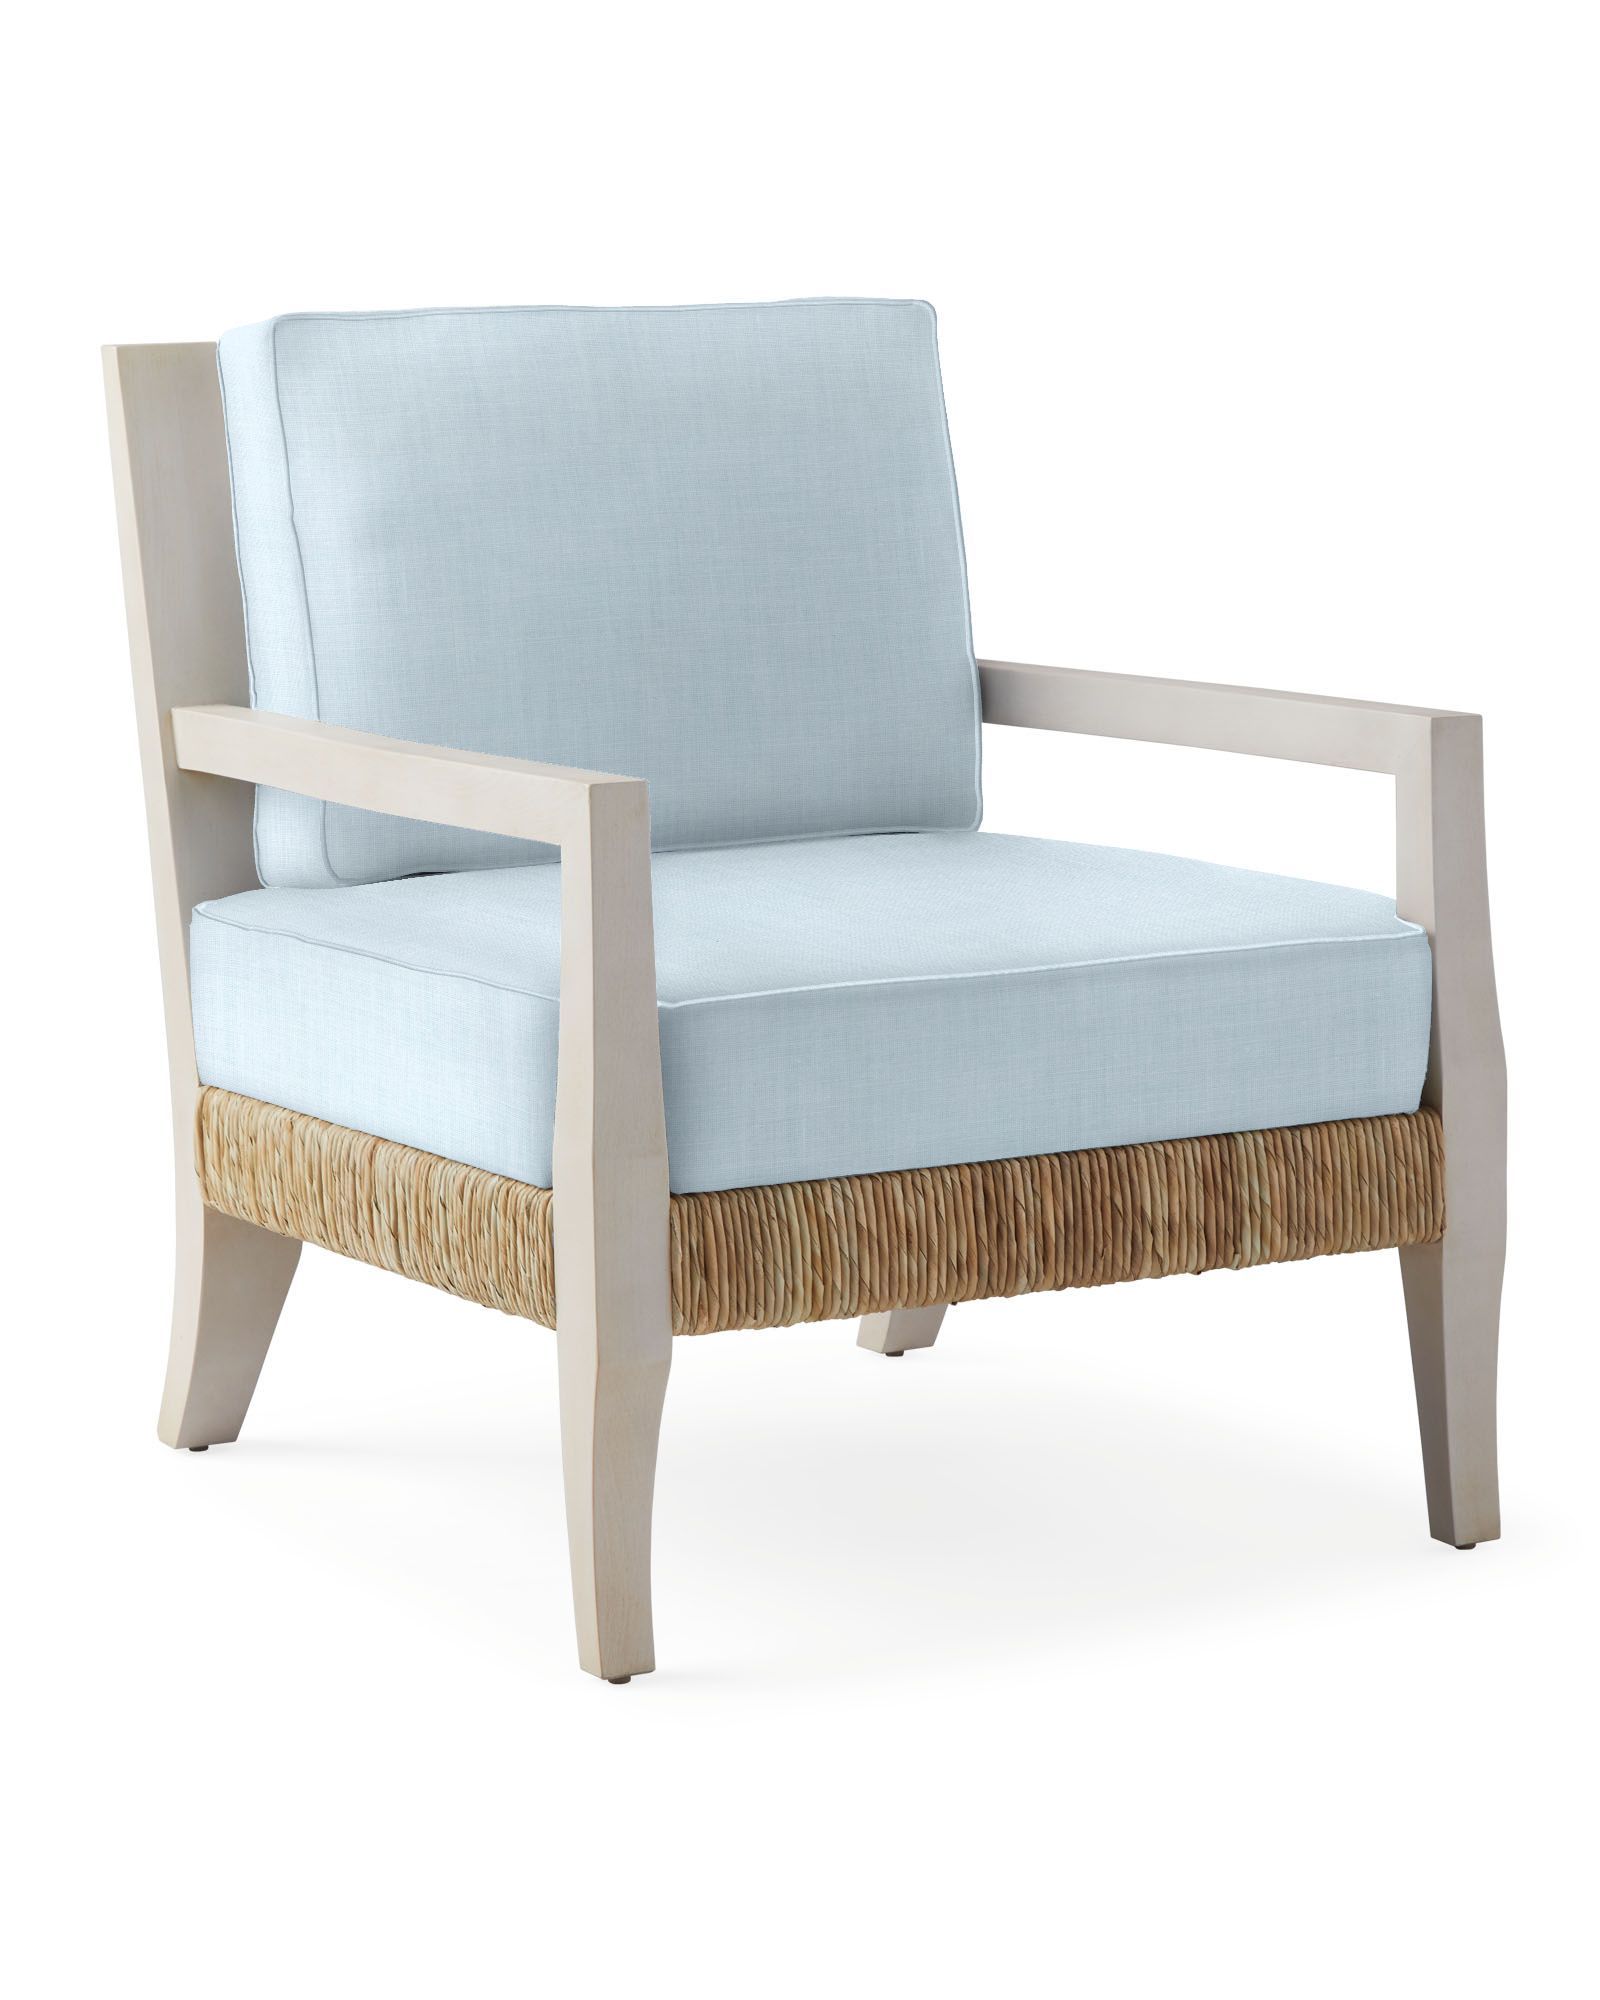 Comporta Lounge Chair - Washed White | Serena and Lily